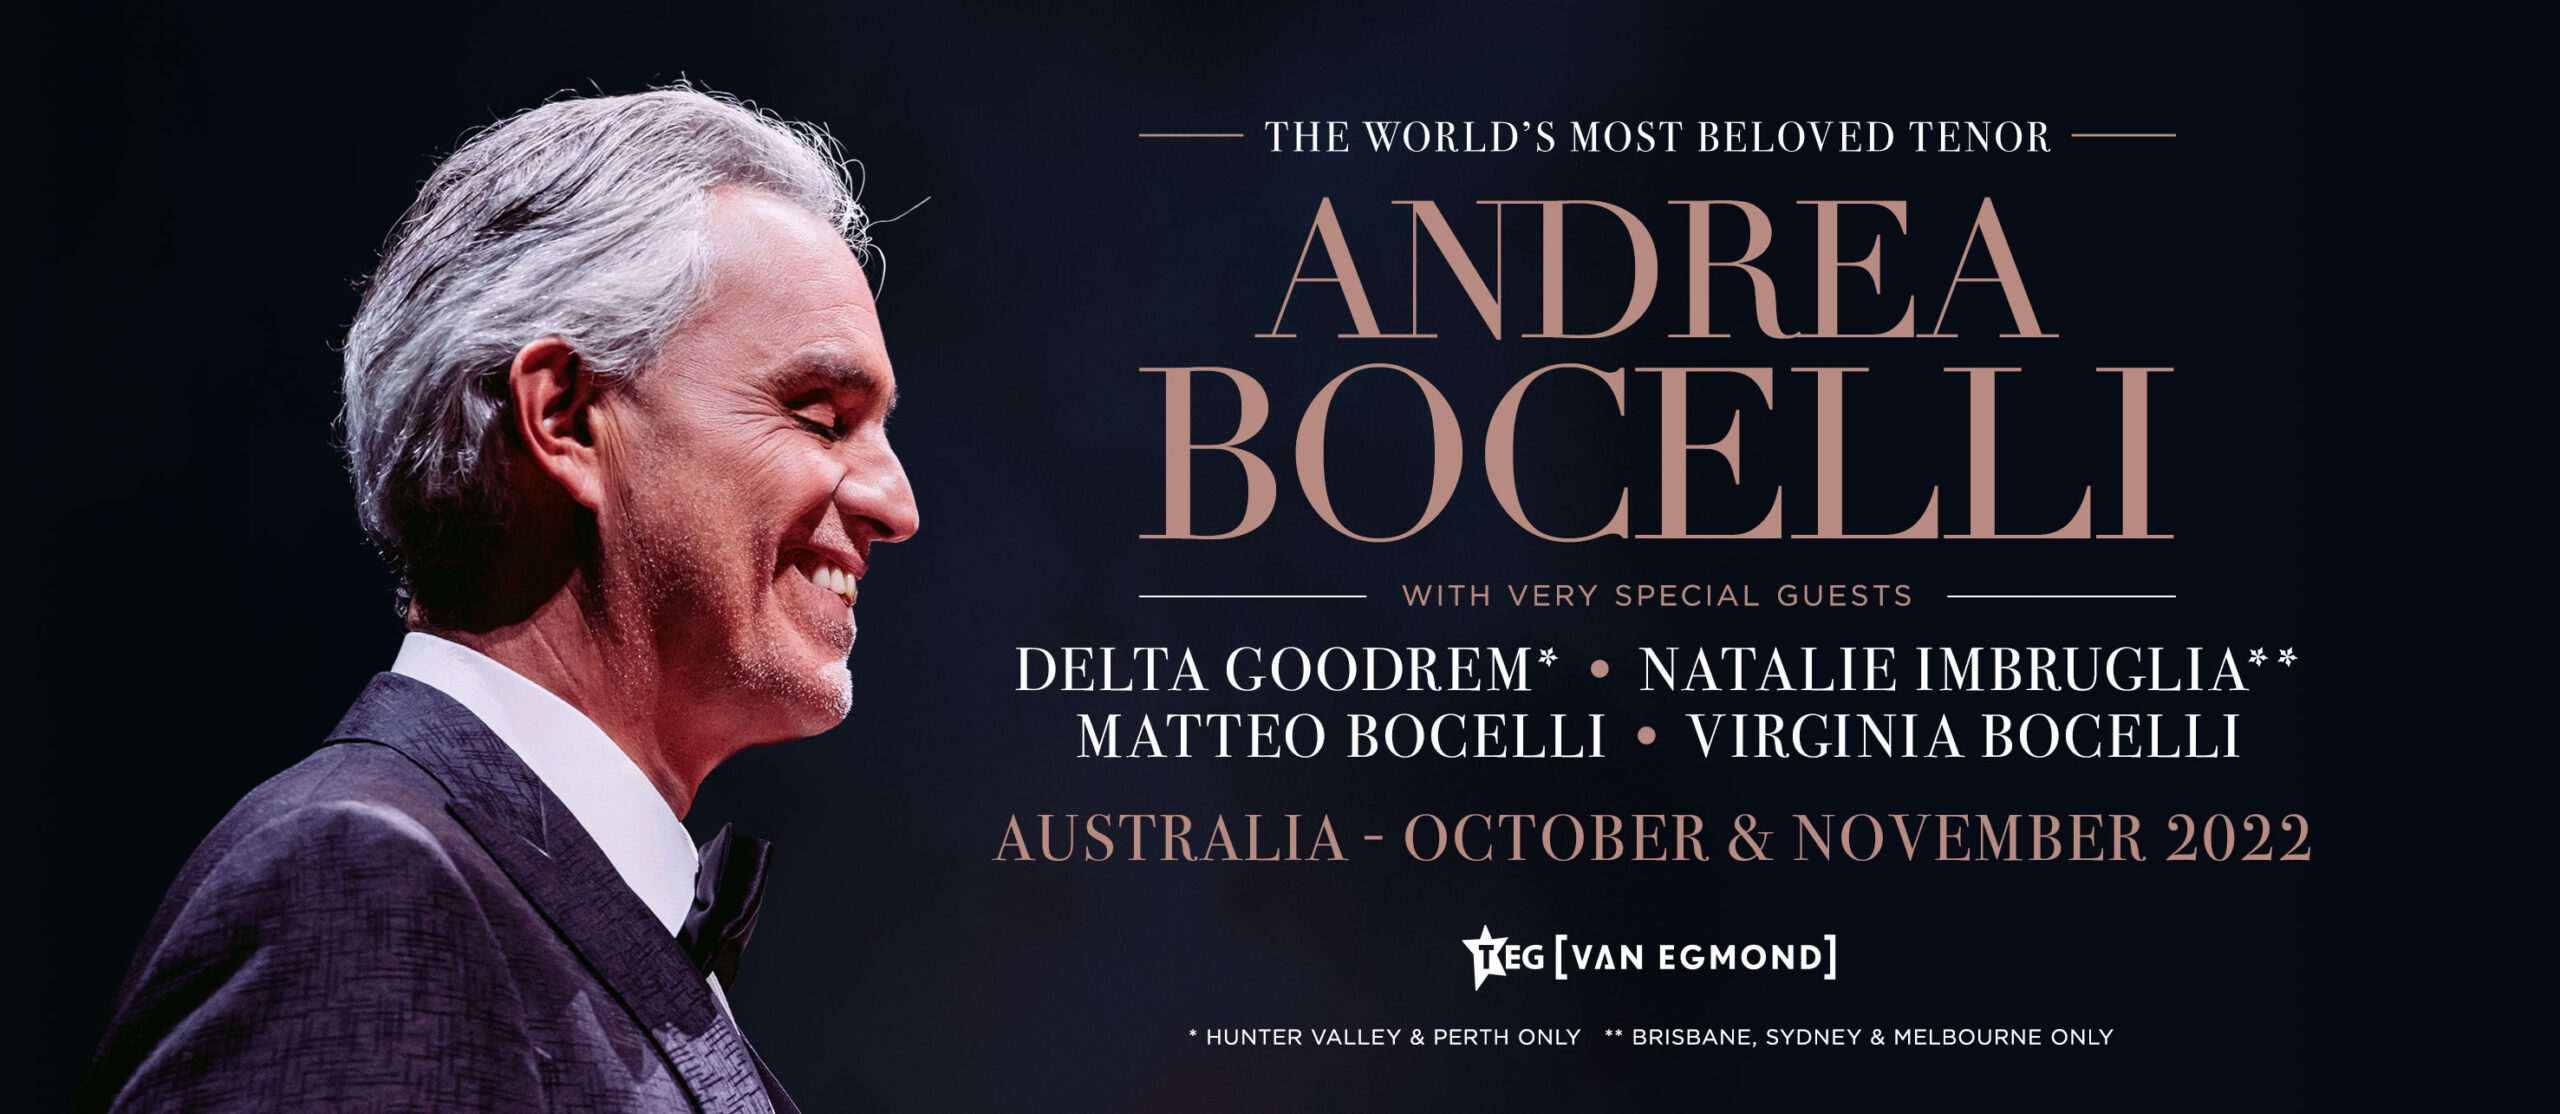 News ANDREA BOCELLI ANNOUNCES A STELLAR LIST OF SPECIAL GUESTS FOR HIS